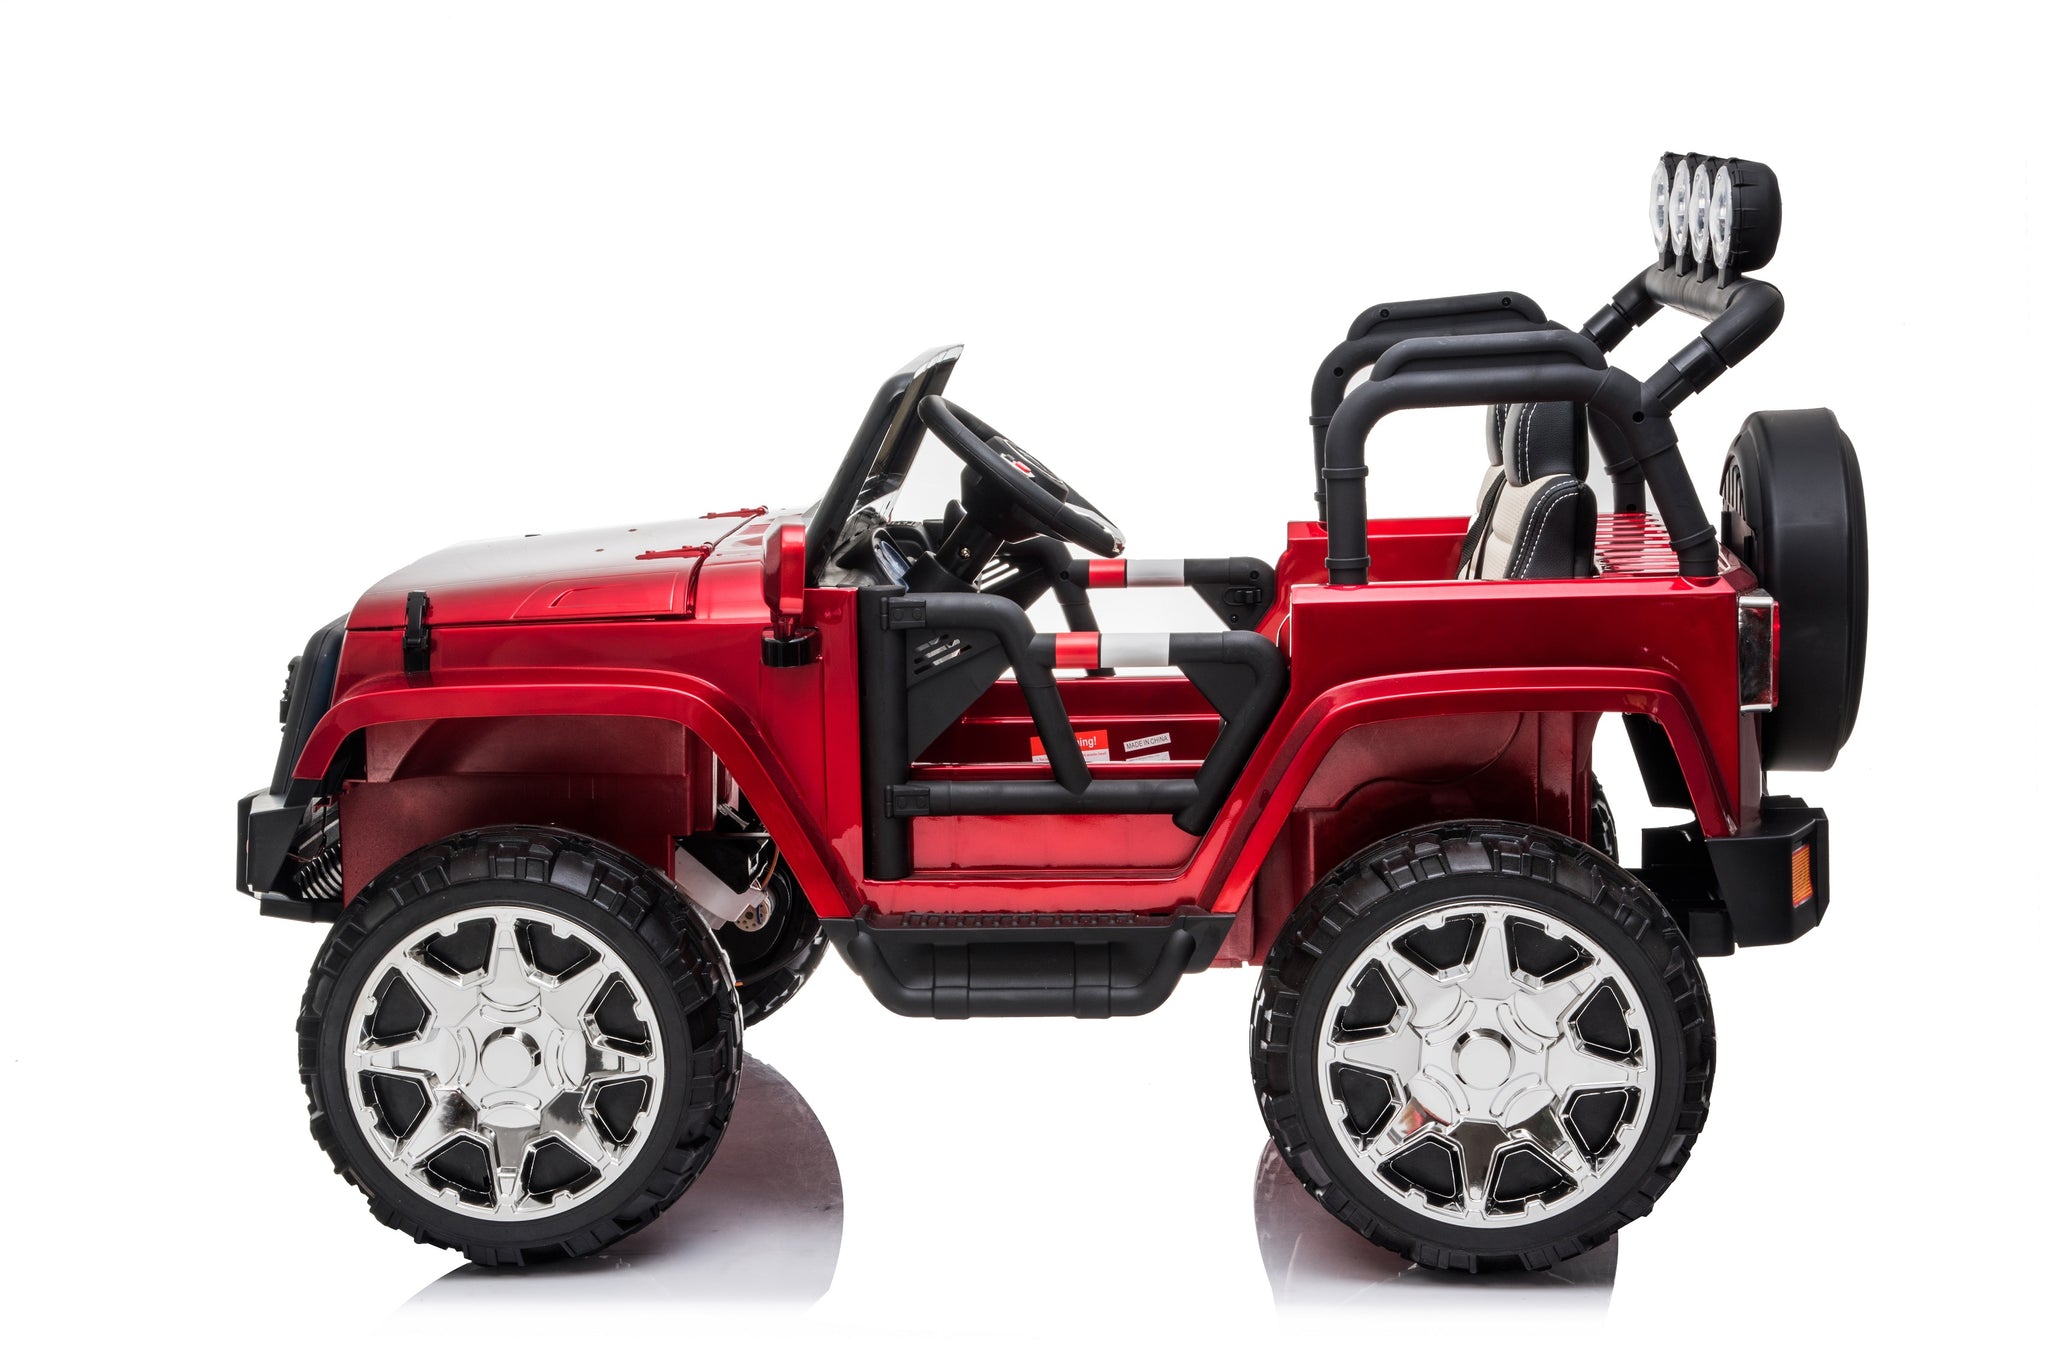 24 volt 4 wheeler with rubber tires